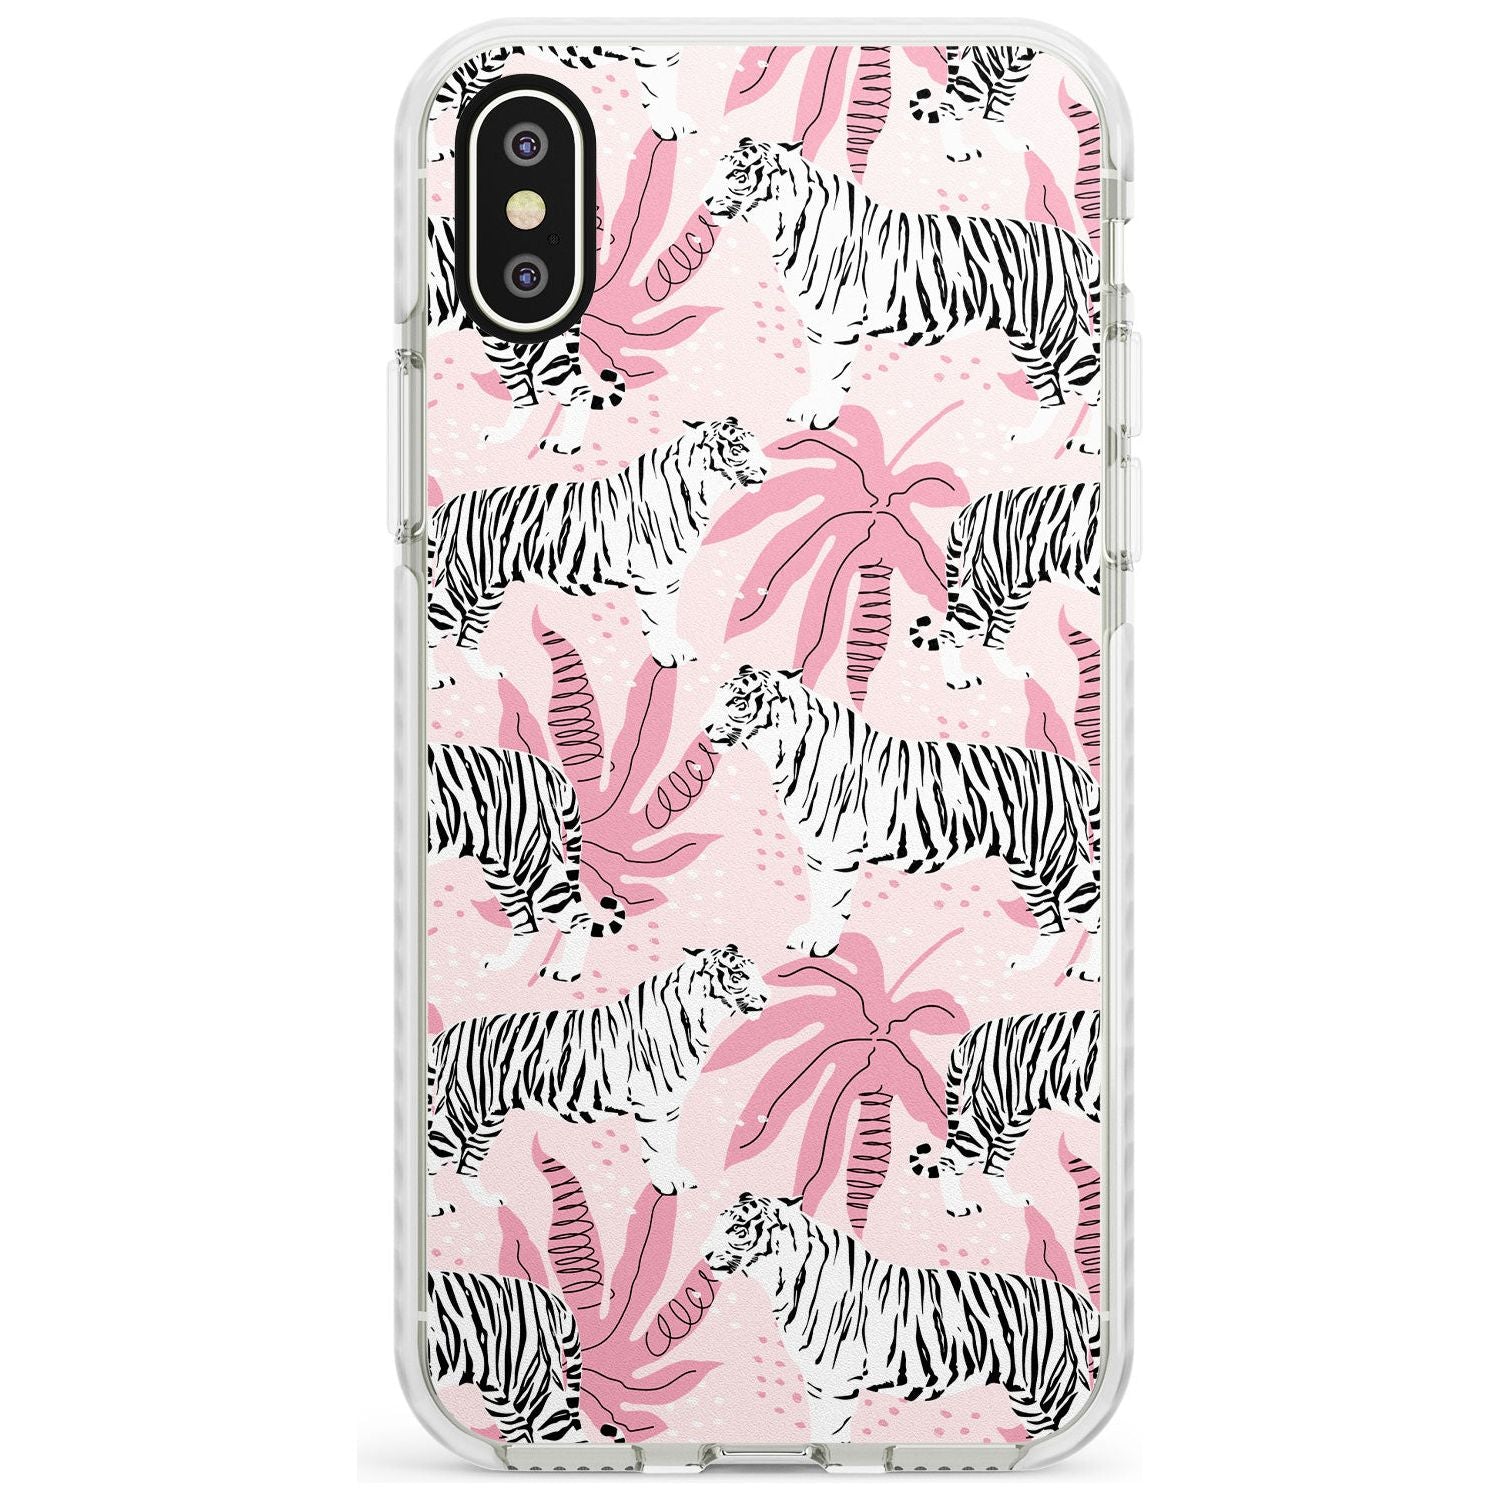 White Tigers on Pink Pattern Impact Phone Case for iPhone X XS Max XR